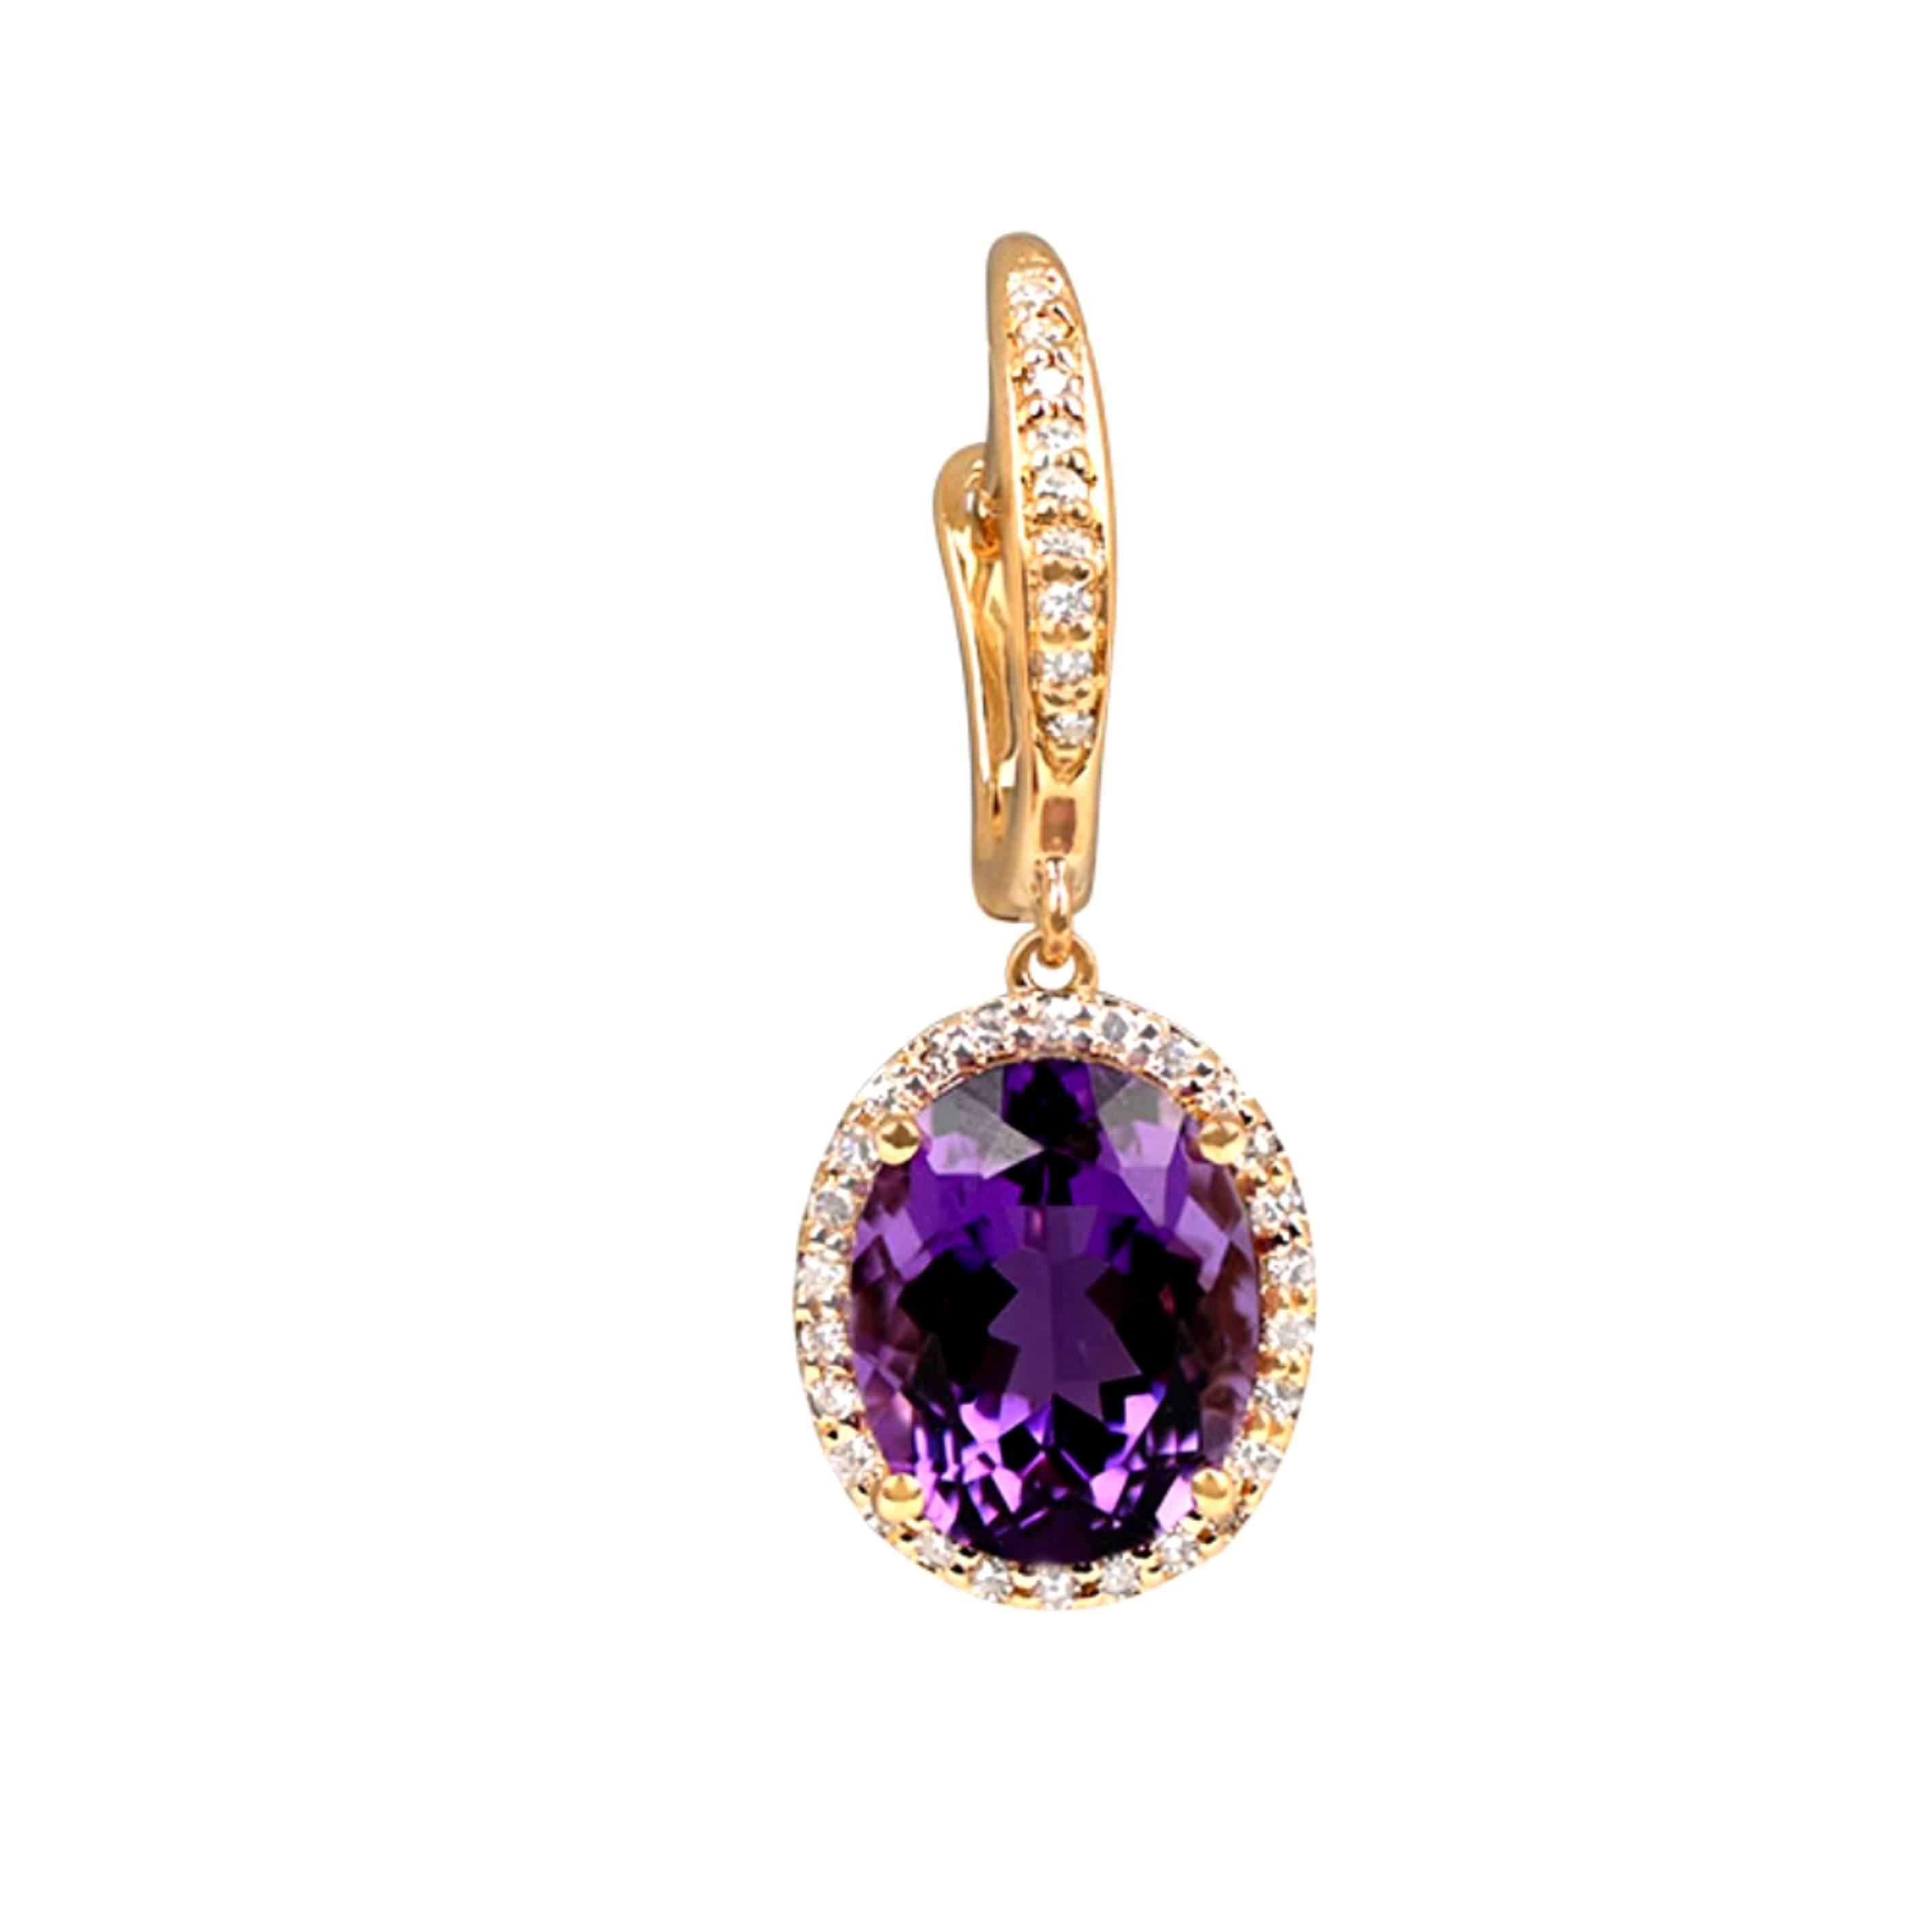 Enhance your elegance with these captivating gemstone drop earrings. Handcrafted in 14k yellow gold, they feature two mesmerizing oval-cut amethysts set in prongs. Each amethyst is embraced by a halo of prong-set single-cut diamonds, adding a touch